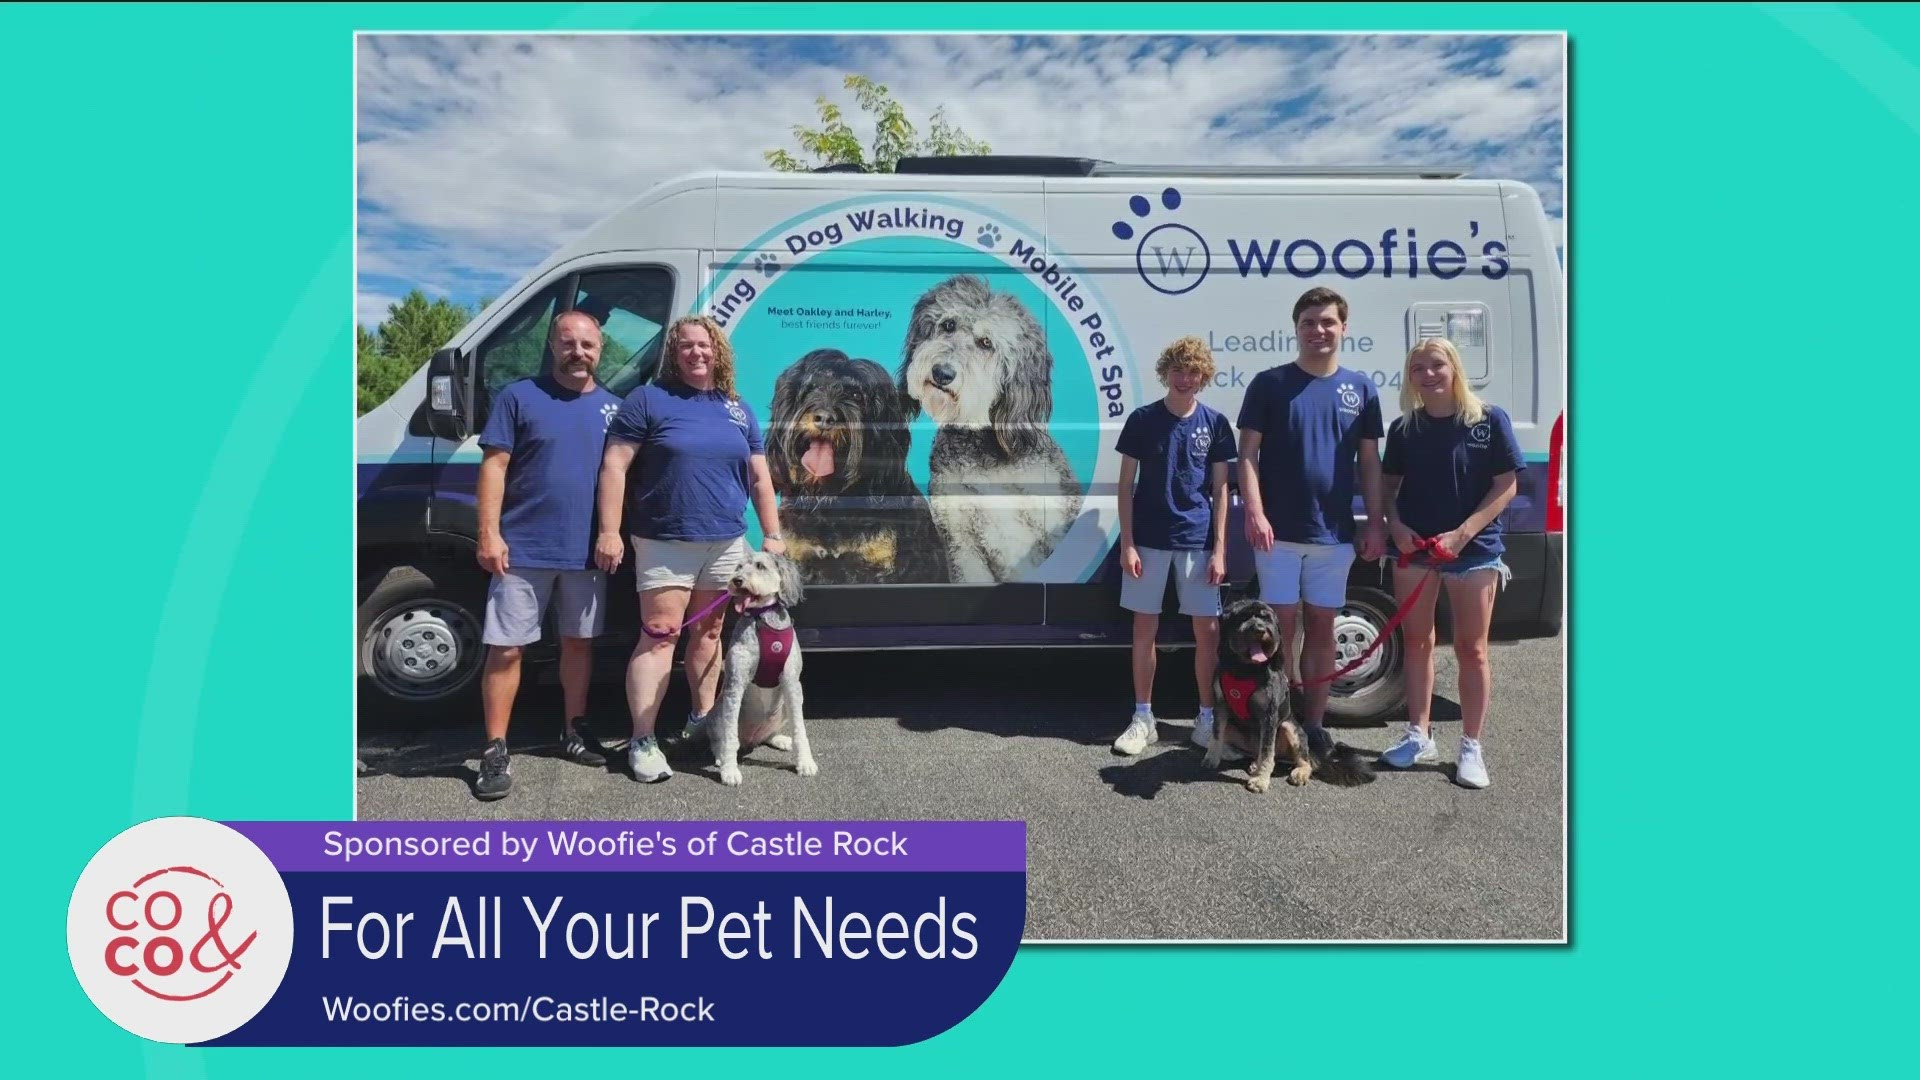 From walking, to grooming, to taxis and more! Woofie's of Castle Rock has something for every pet owner. Learn more at Woofies.com/Castle-Rock. **PAID CONTENT**